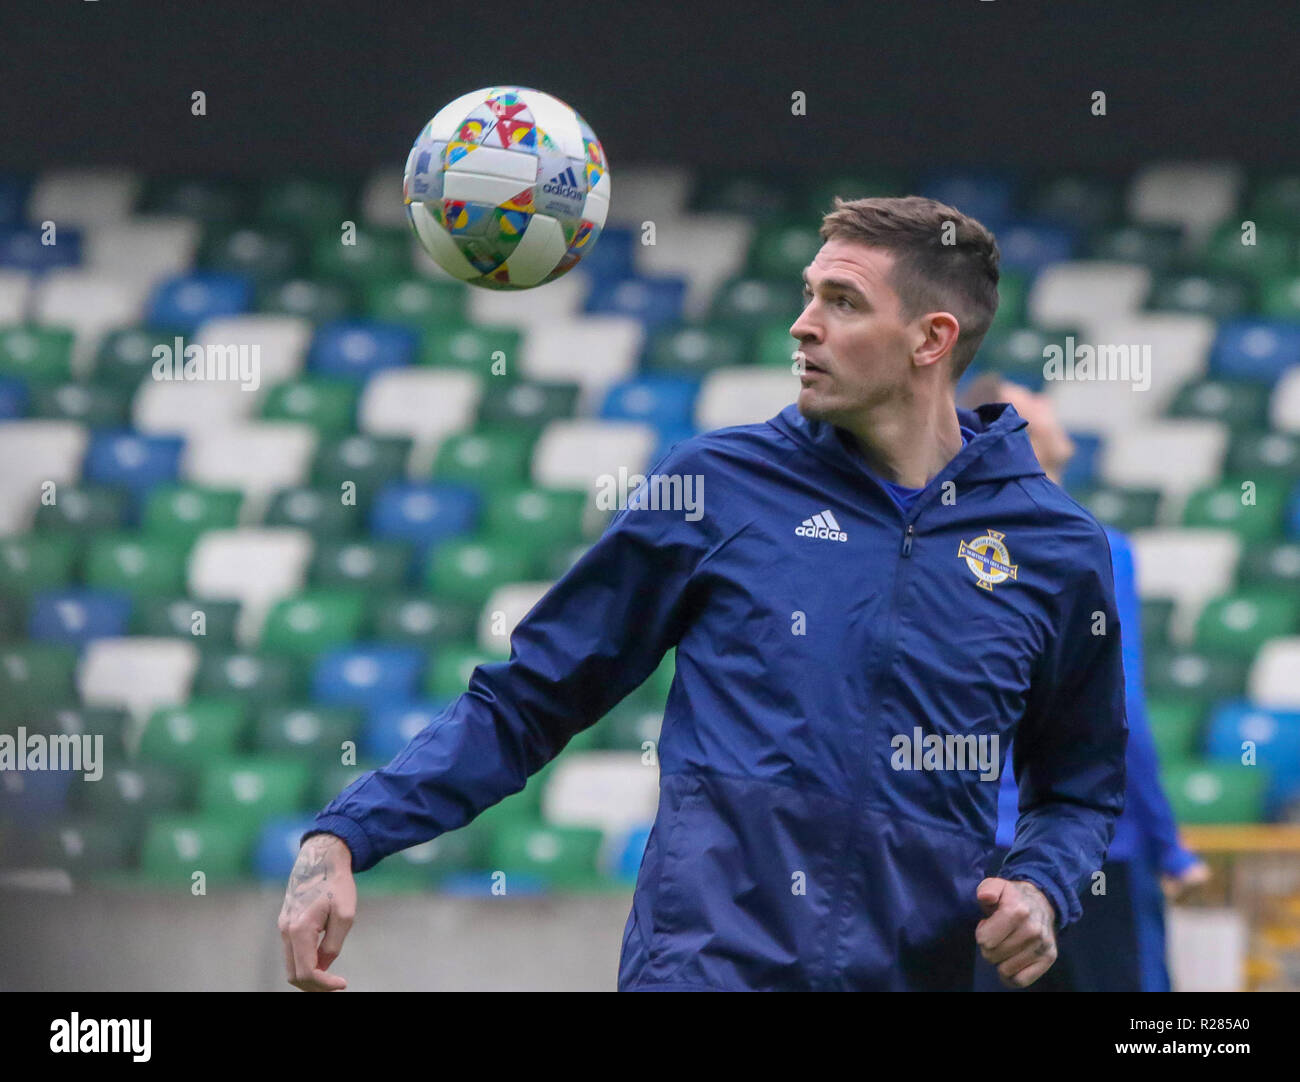 Windsor Park, Belfast, Northern Ireland.17 November 2018. Northern Ireland training in Belfast this morning ahead of their UEFA Nations League game against Austria tomorrow night in the stadium. Kyle Lafferty at training. Credit: David Hunter/Alamy Live News. Stock Photo